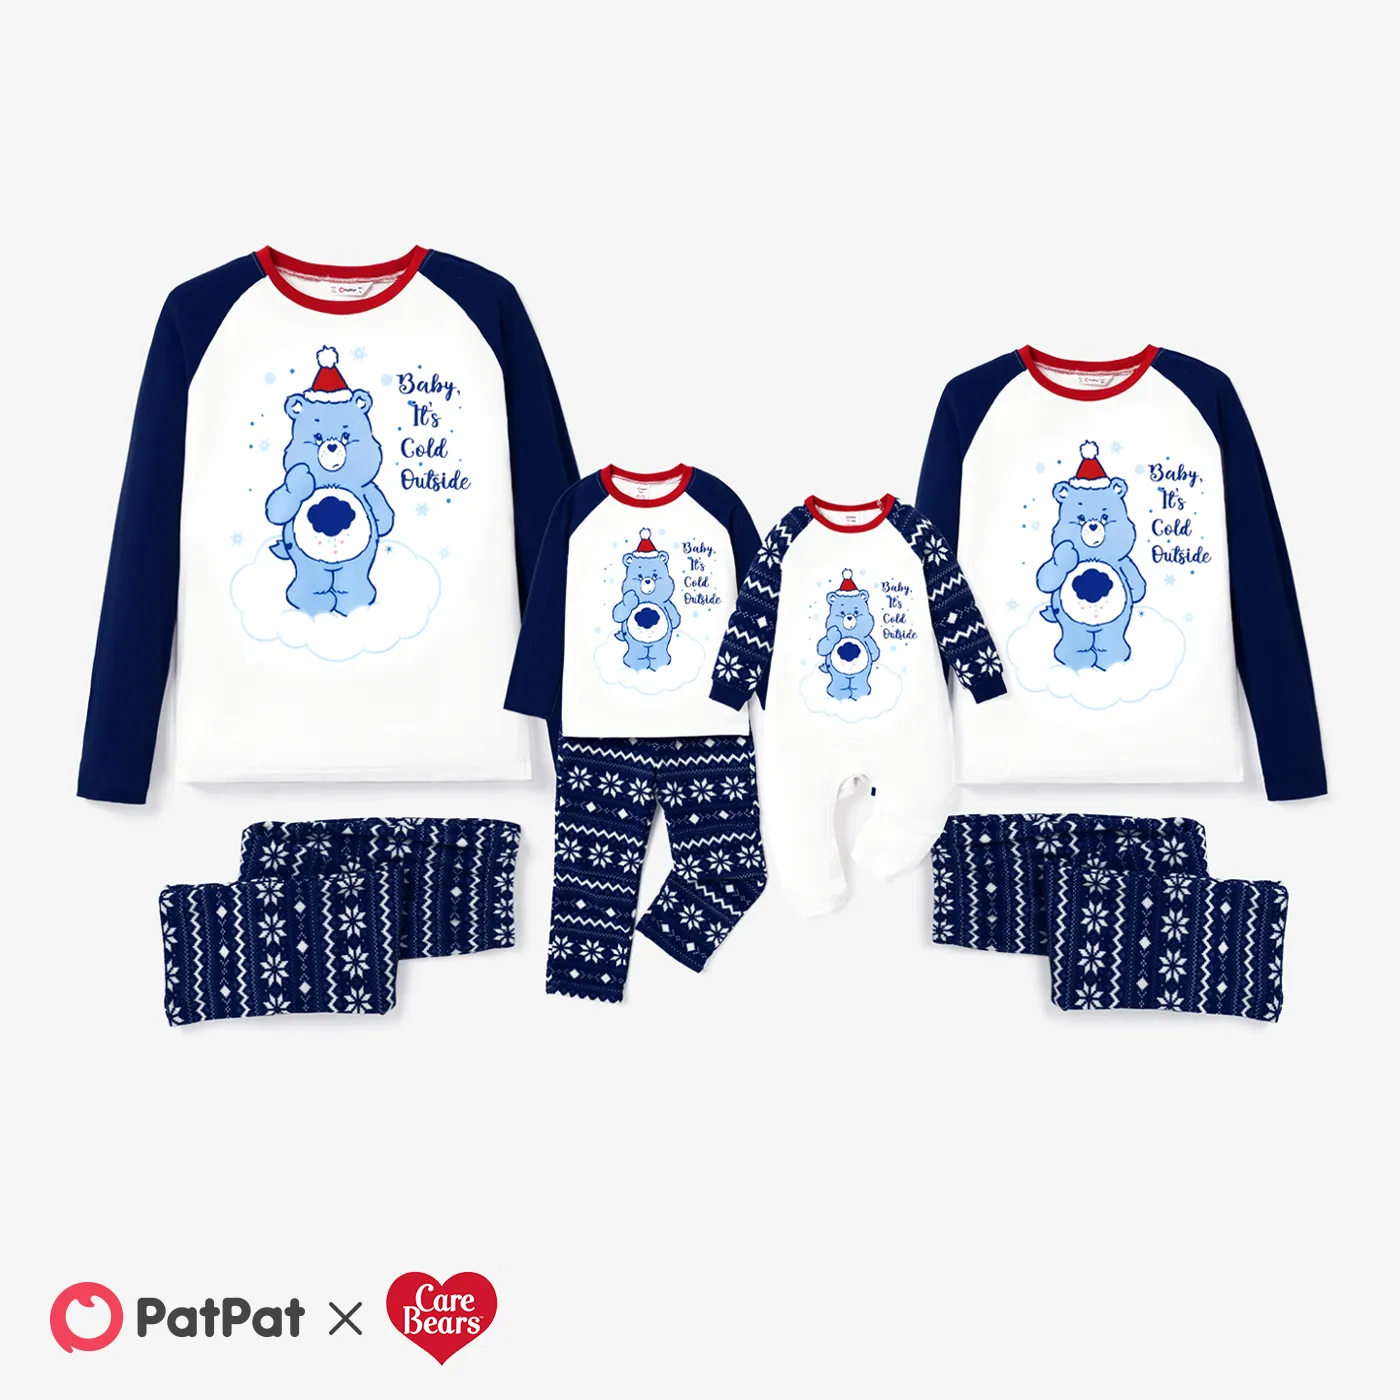 

Care Bears Family Matching Christmas Graphic Top and Letter Allover Pants Pajamas Sets(Flame Resistant)